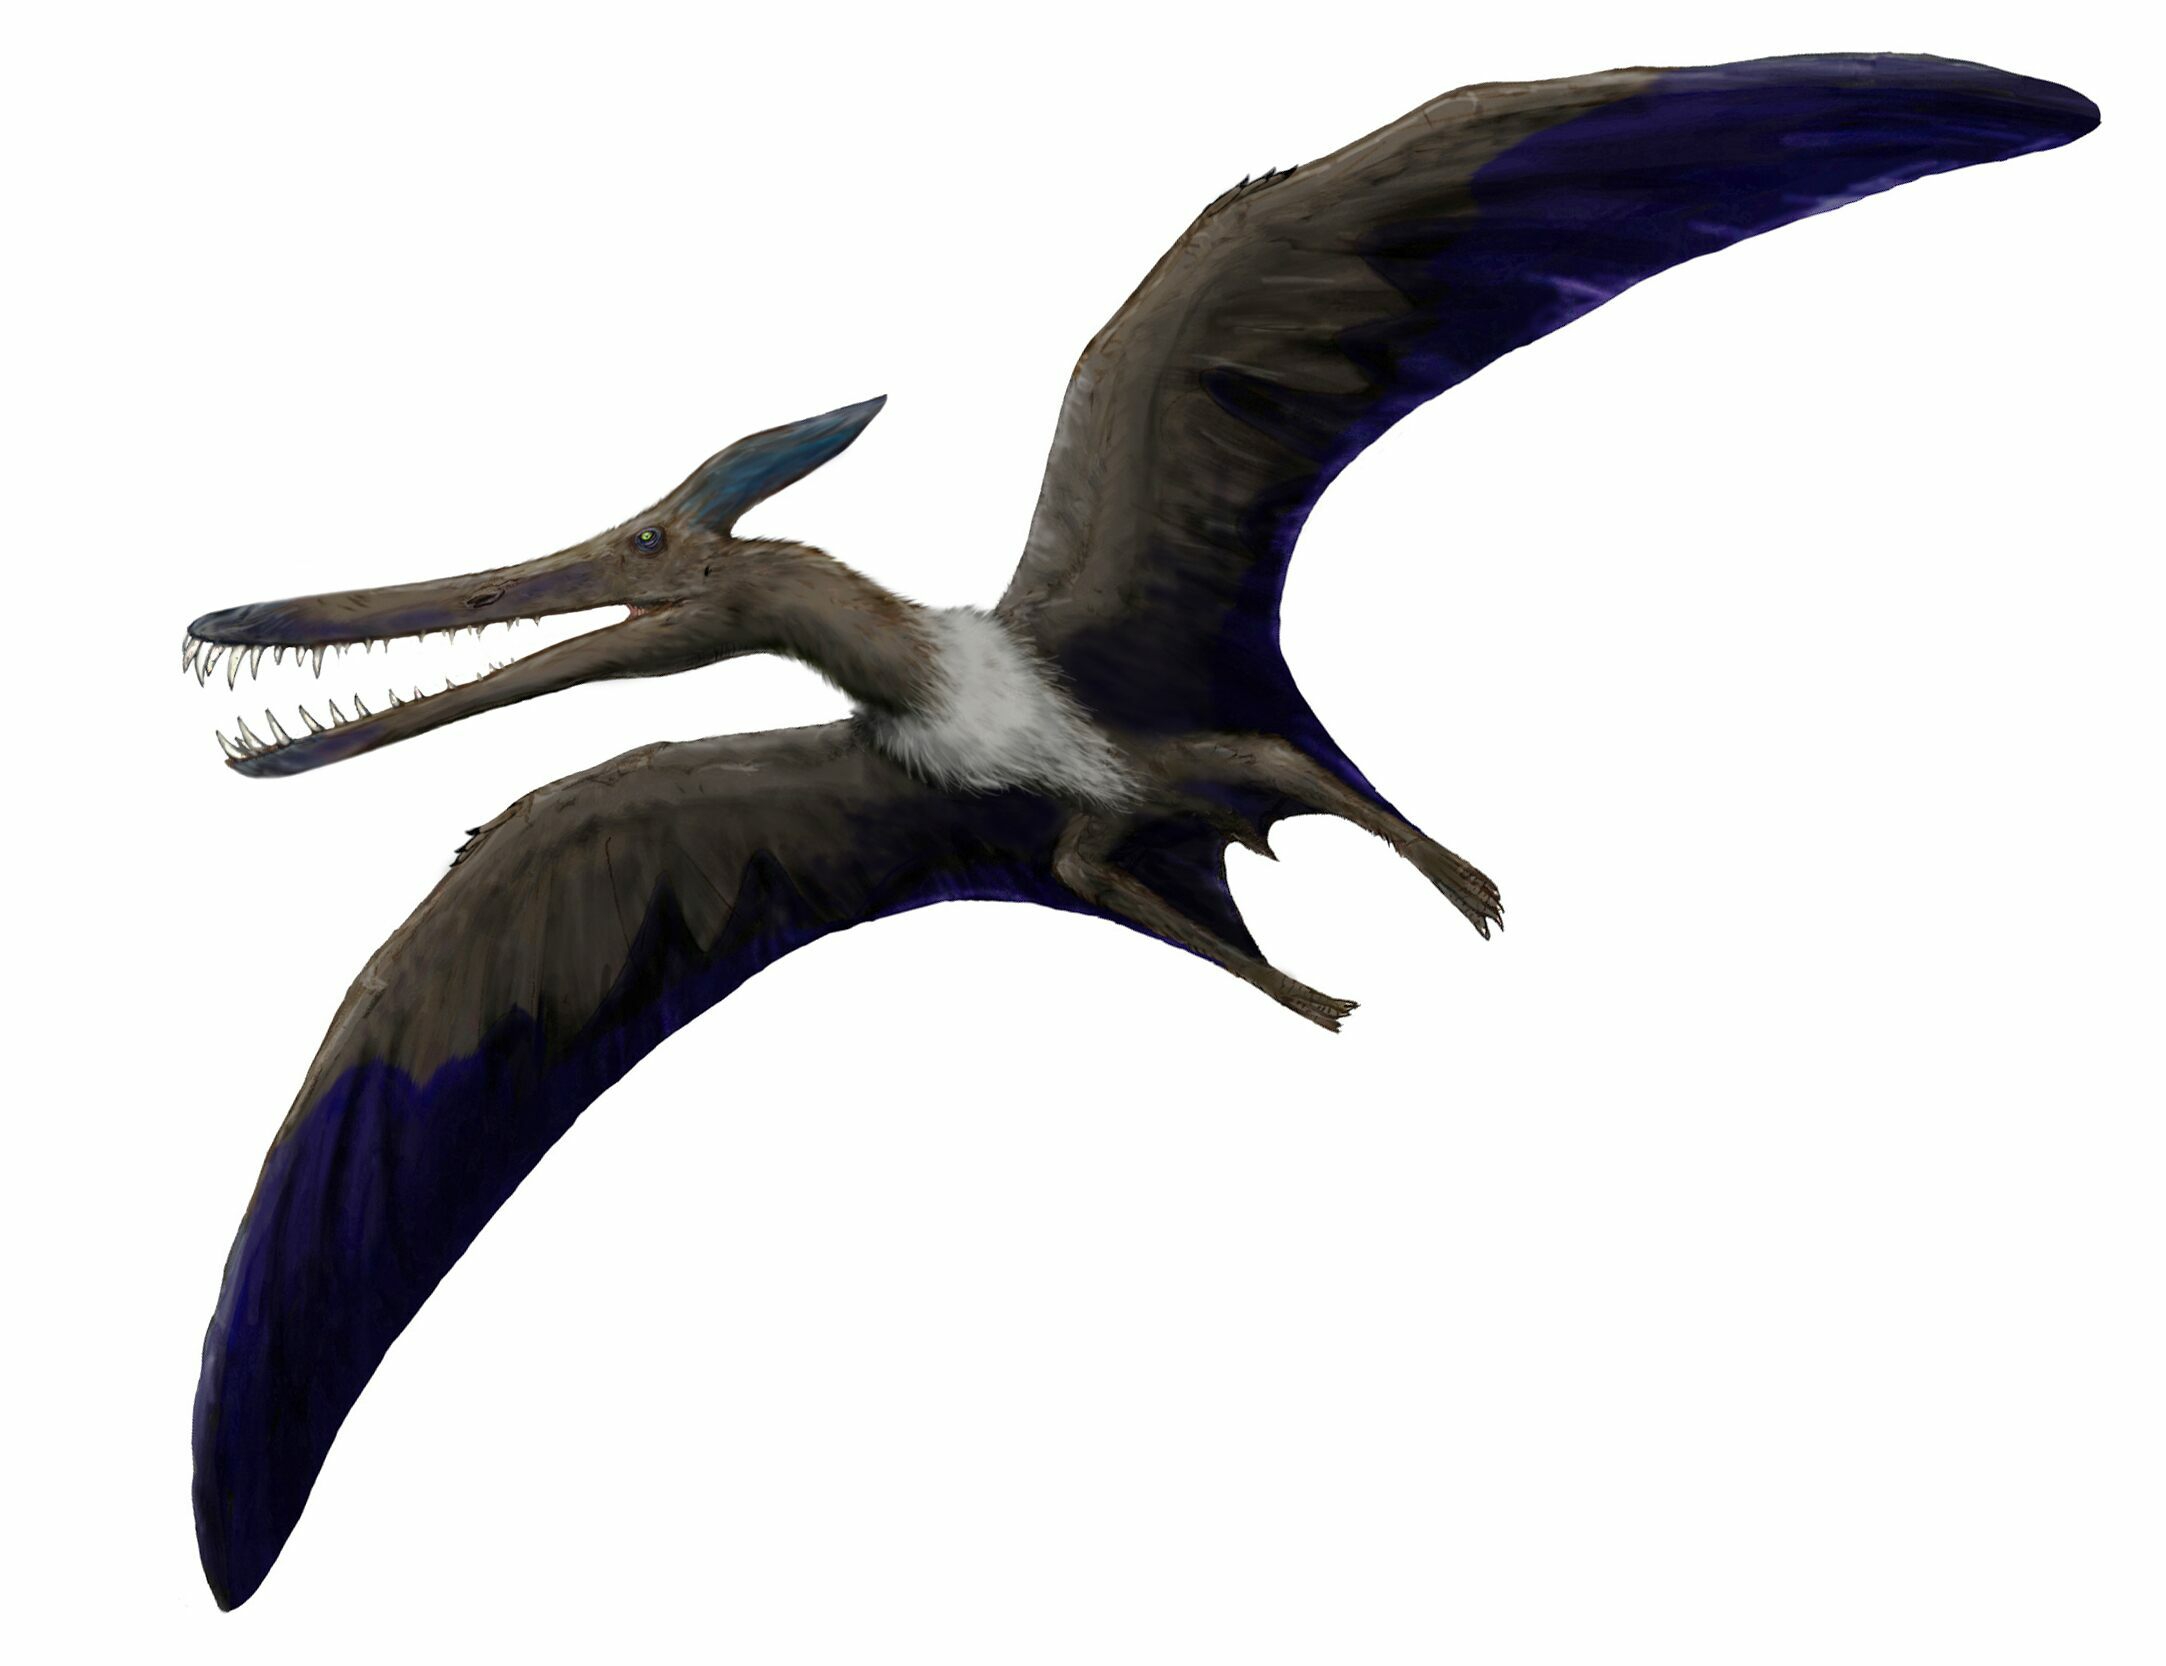 Pteranodon vs Pterodactyl, Some birds, some pterosaurs (which is